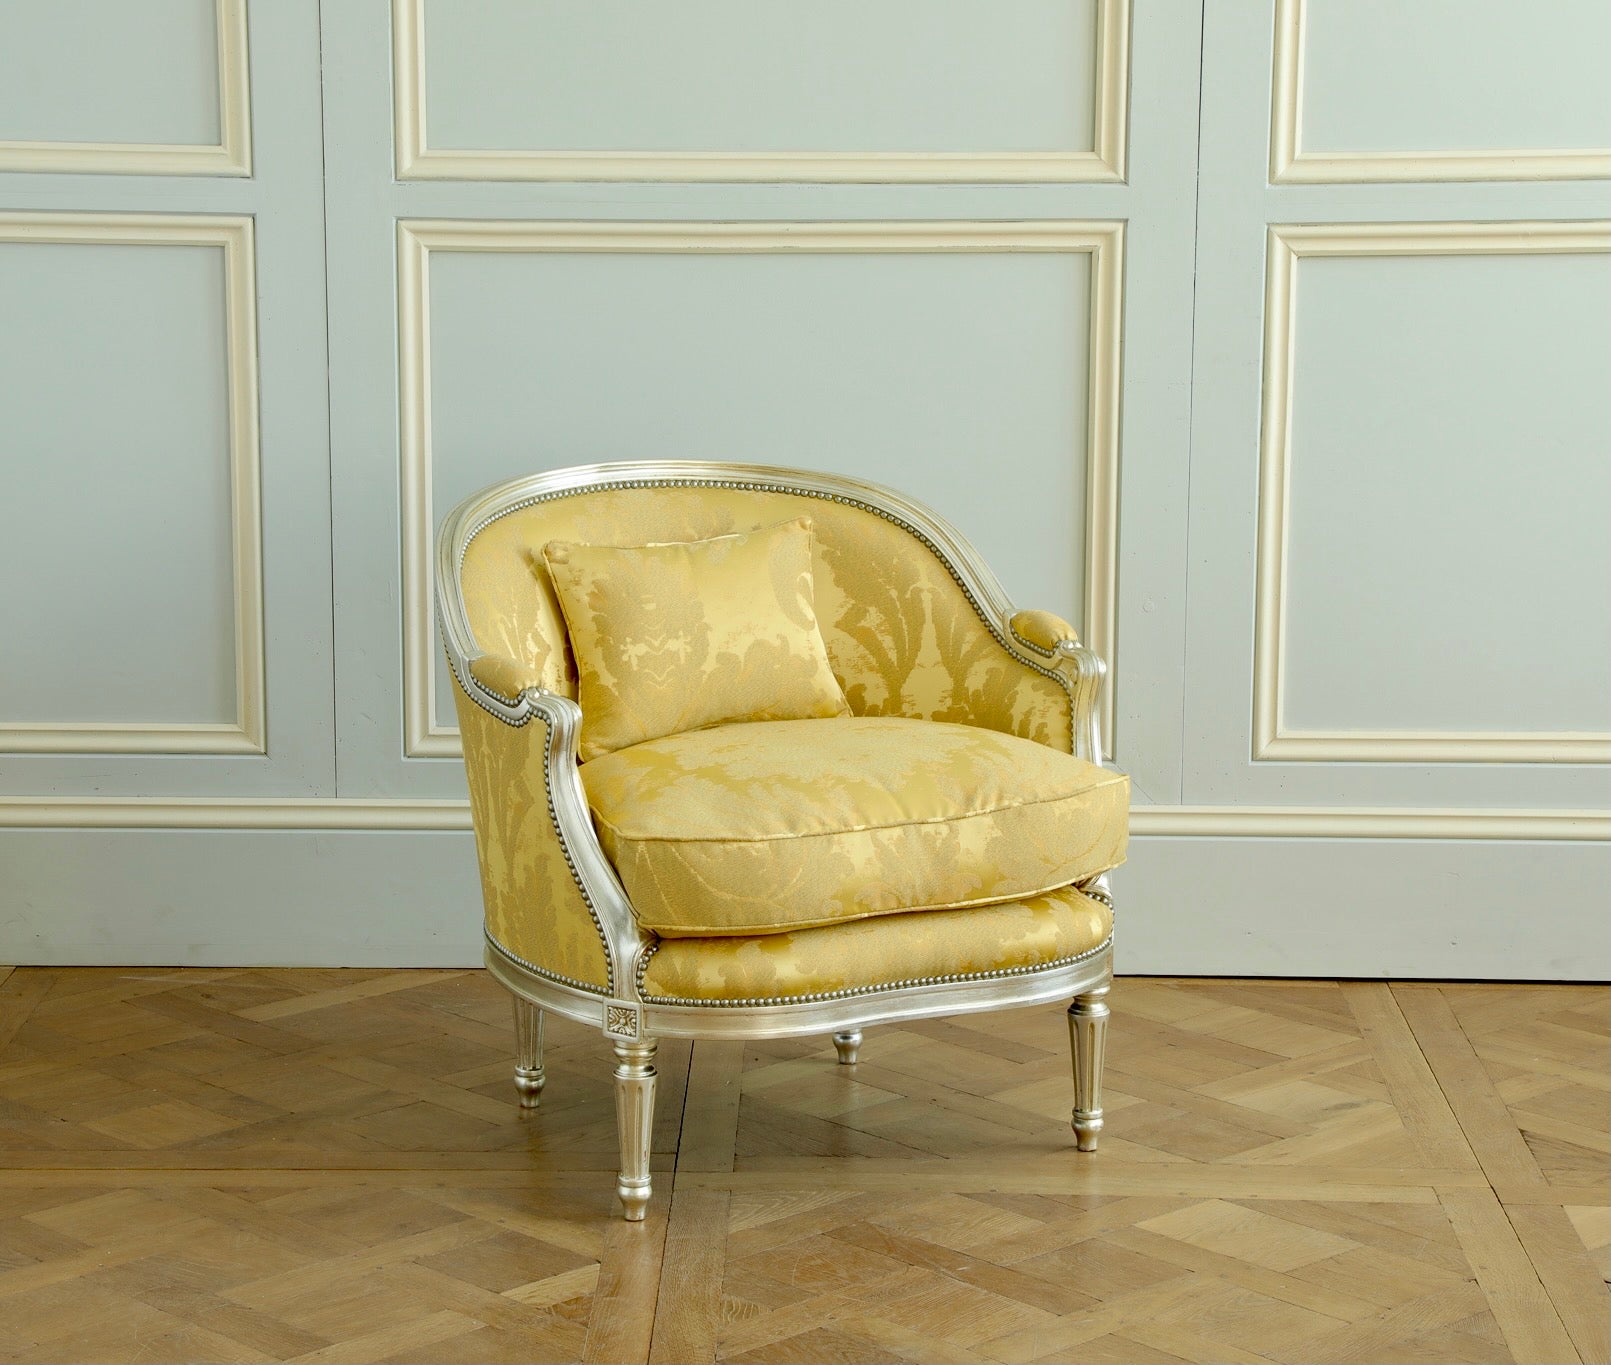 A  Hollywood Regency style marquise armchair featuring elegant curves and a glamorous silver gilt wood finish. The chairs have a plump feather seat cushion for comfort and are upholstered in an Italian fabric by Rubelli with a blue scatter cushion